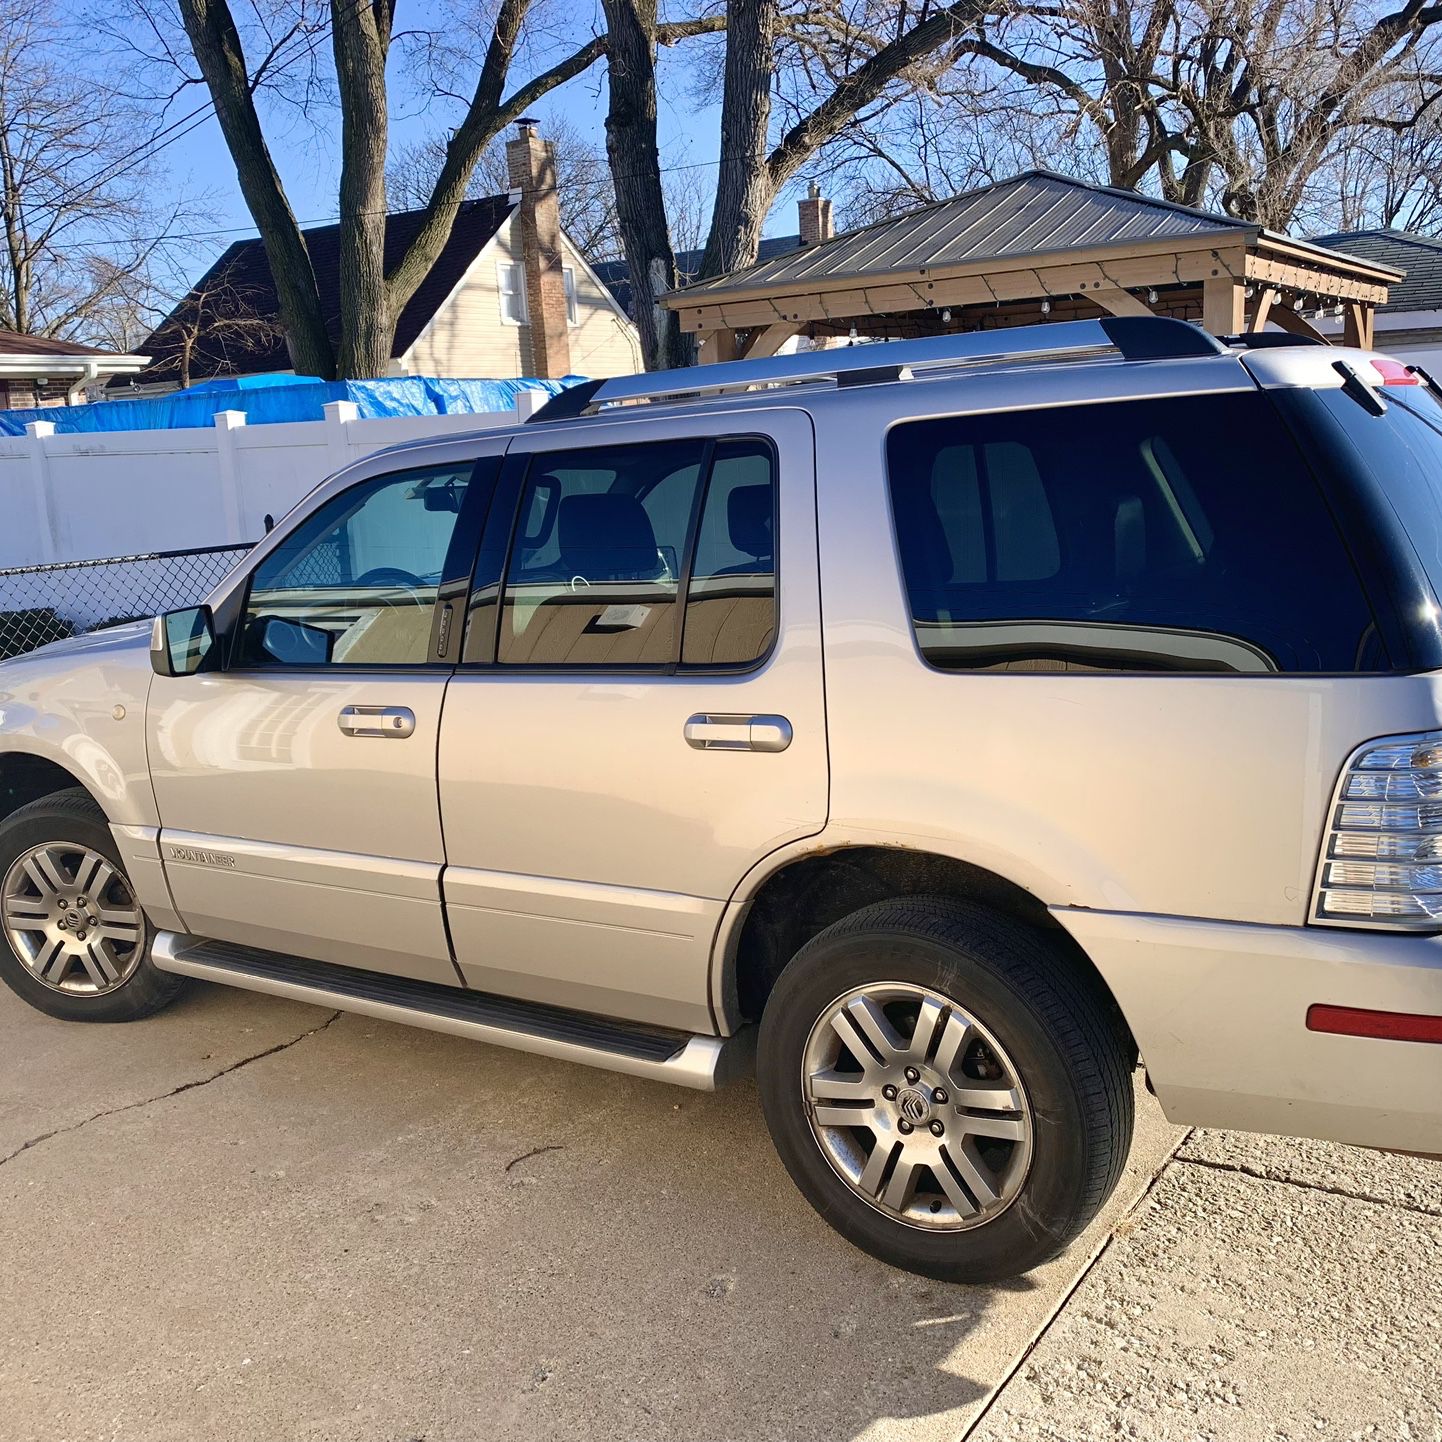 2007 Mercury Mountaineer for Sale in Hinsdale, IL - OfferUp